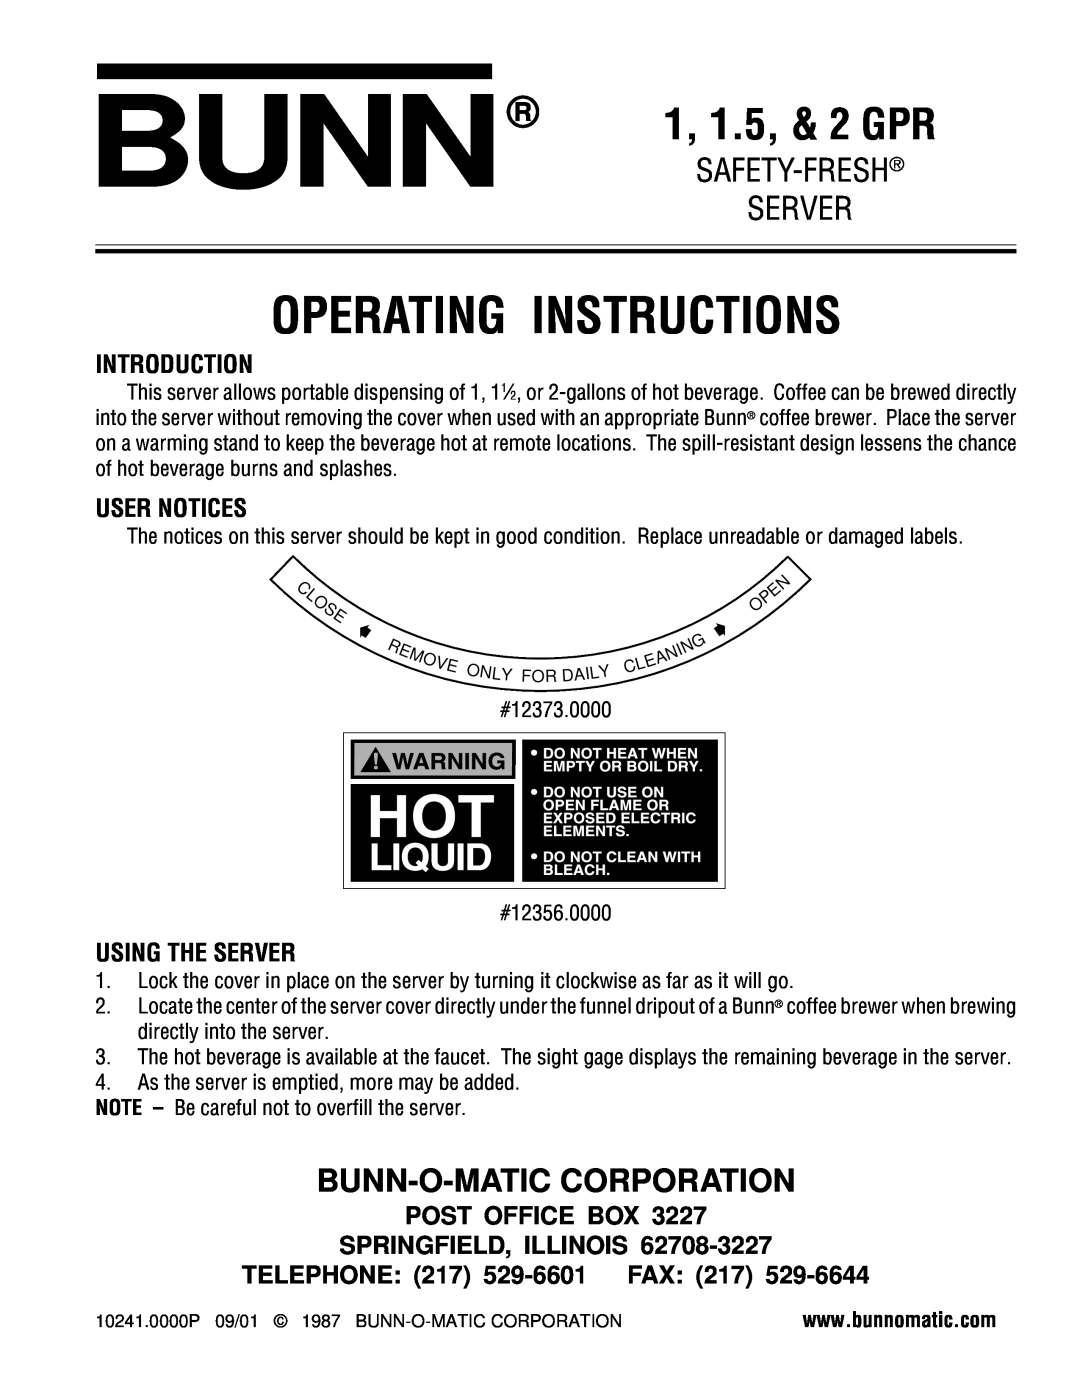 Bunn 1 GPR operating instructions Safety-Fresh, Introduction, User Notices, Using The Server, TELEPHONE 217 529-6601FAX 